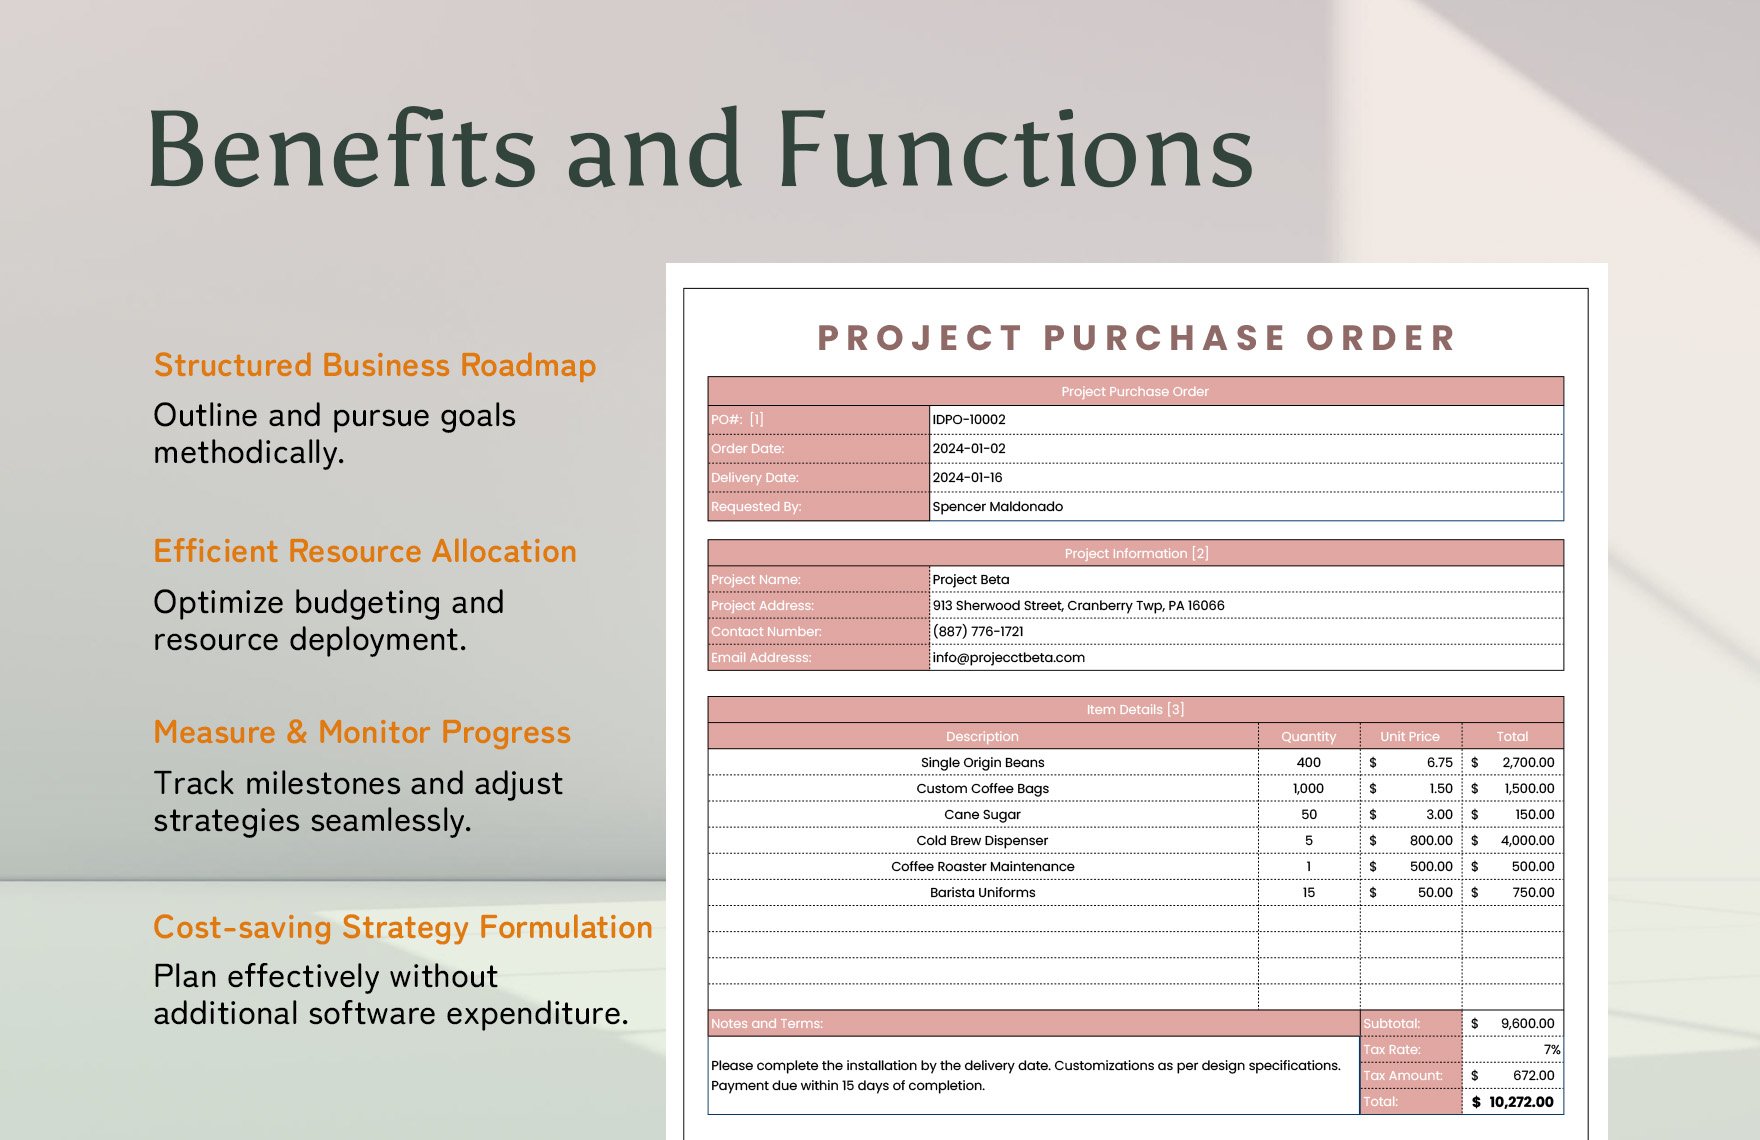 Project Purchase Order Template